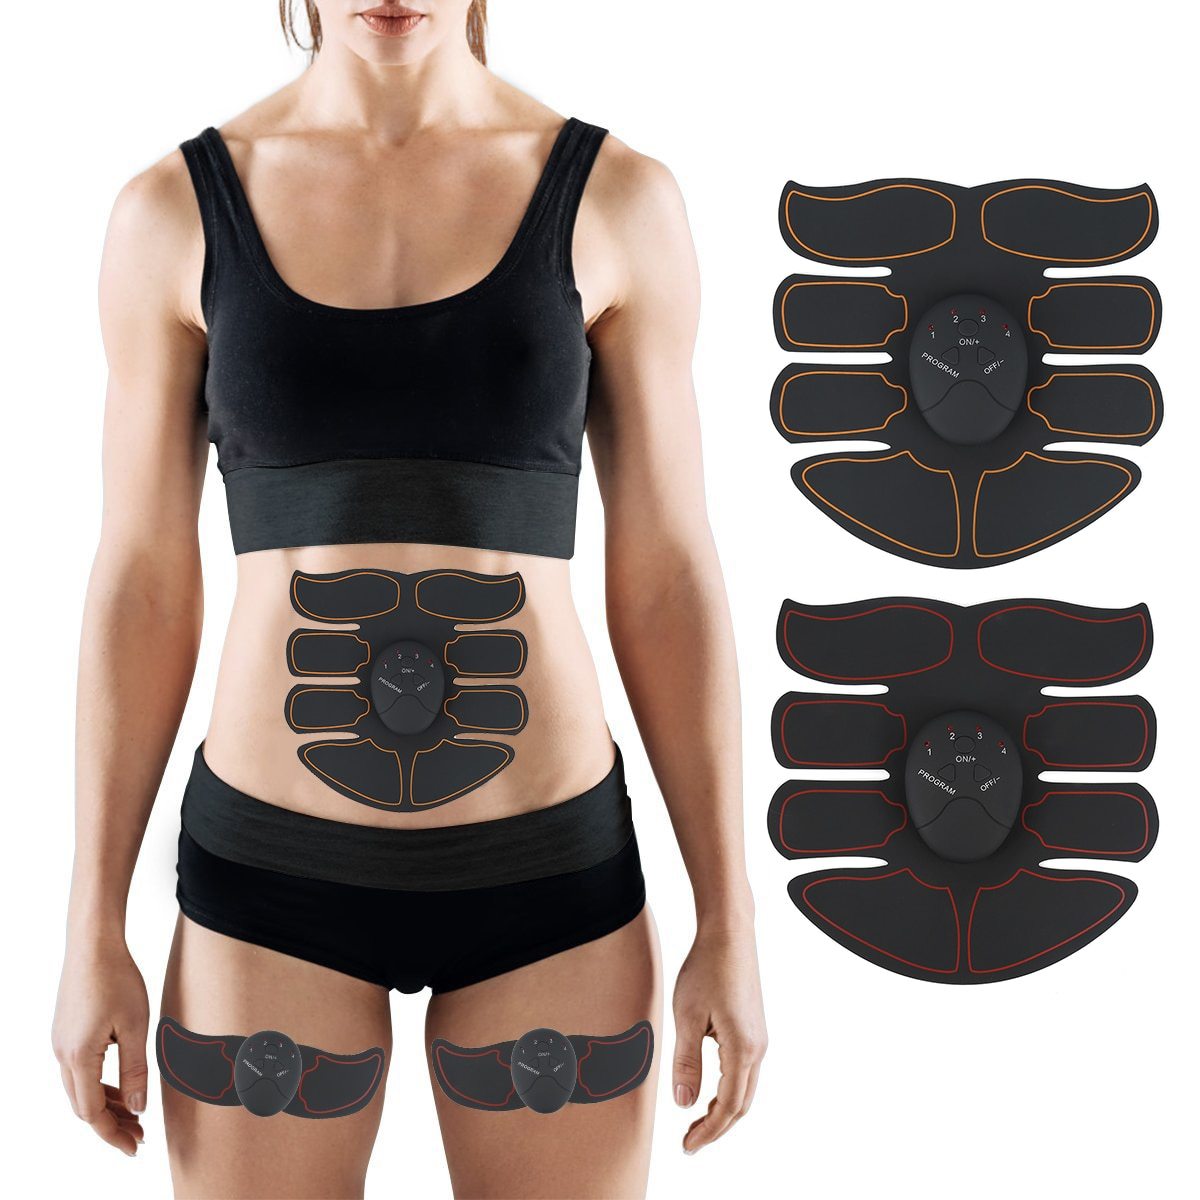 Electrical Abdomen and Arm Muscle Stimulator